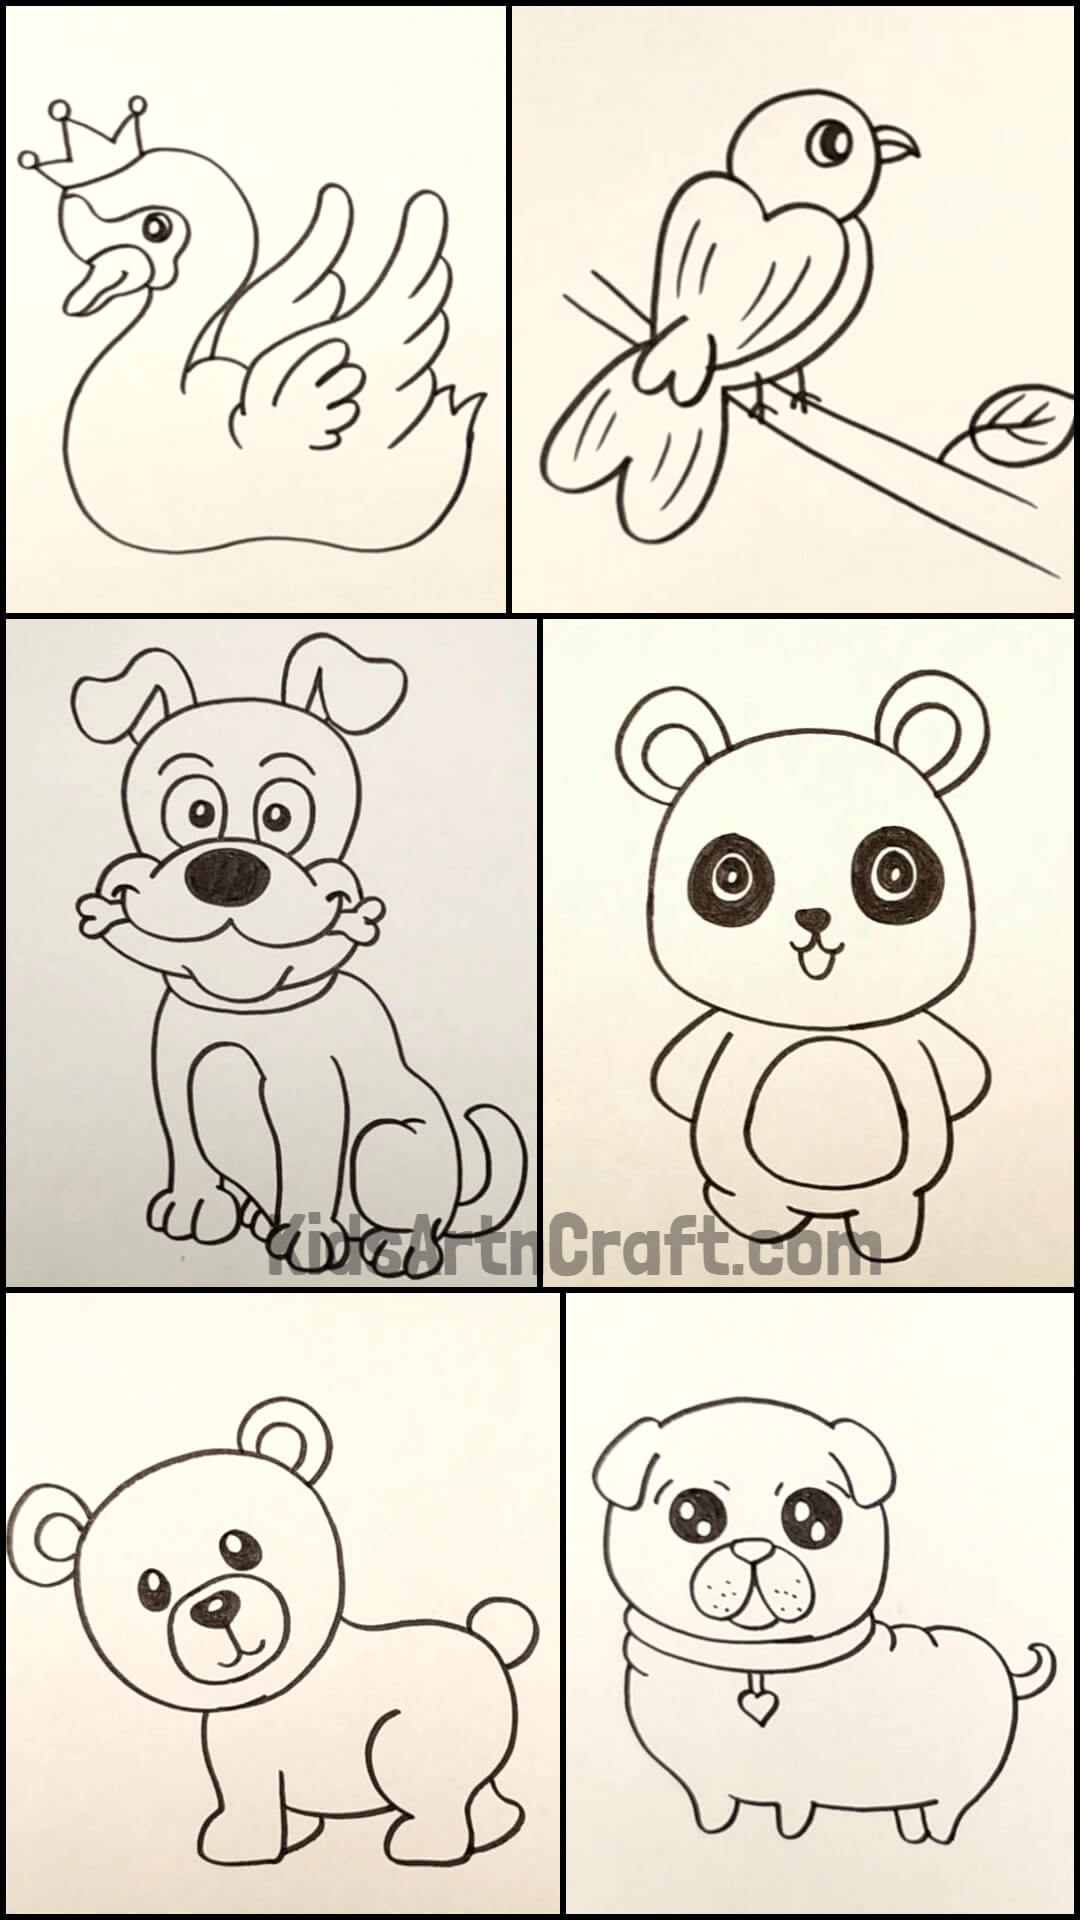 Simple Animal Drawing Ideas for Kids